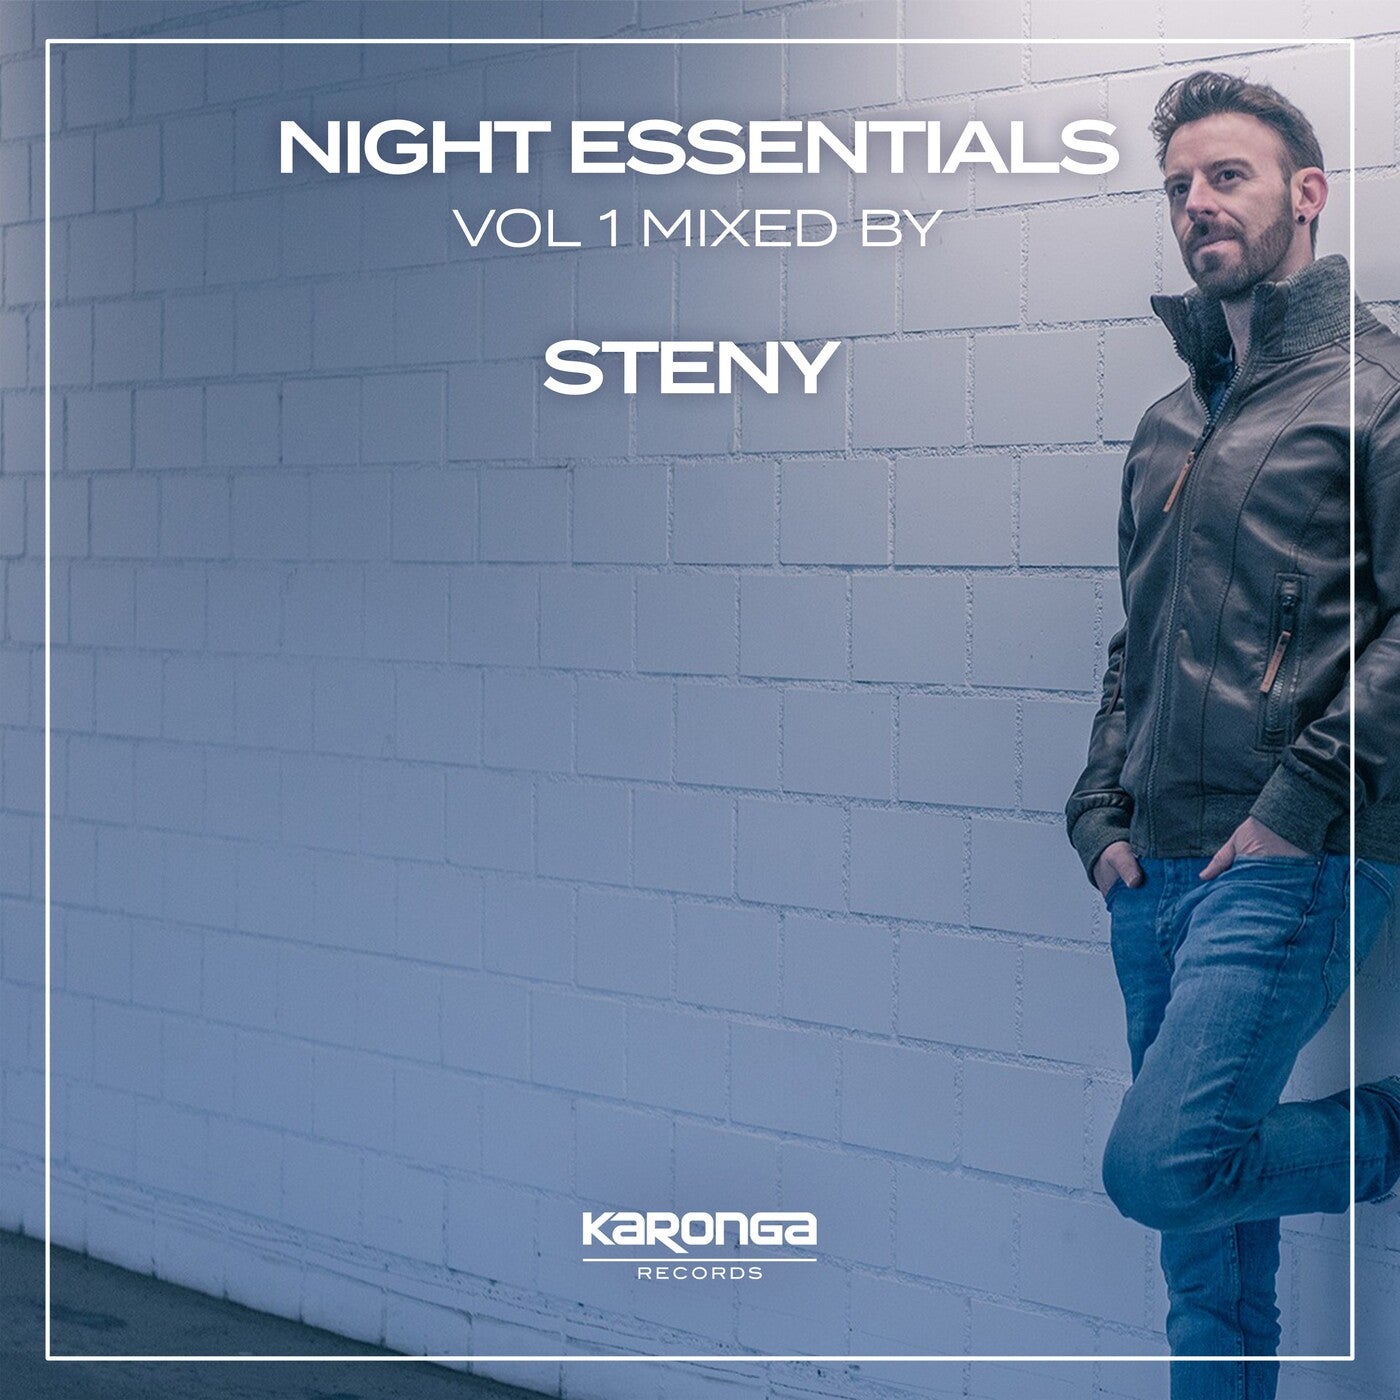 Night Essentials Vol. 1 (Mixed by Steny)